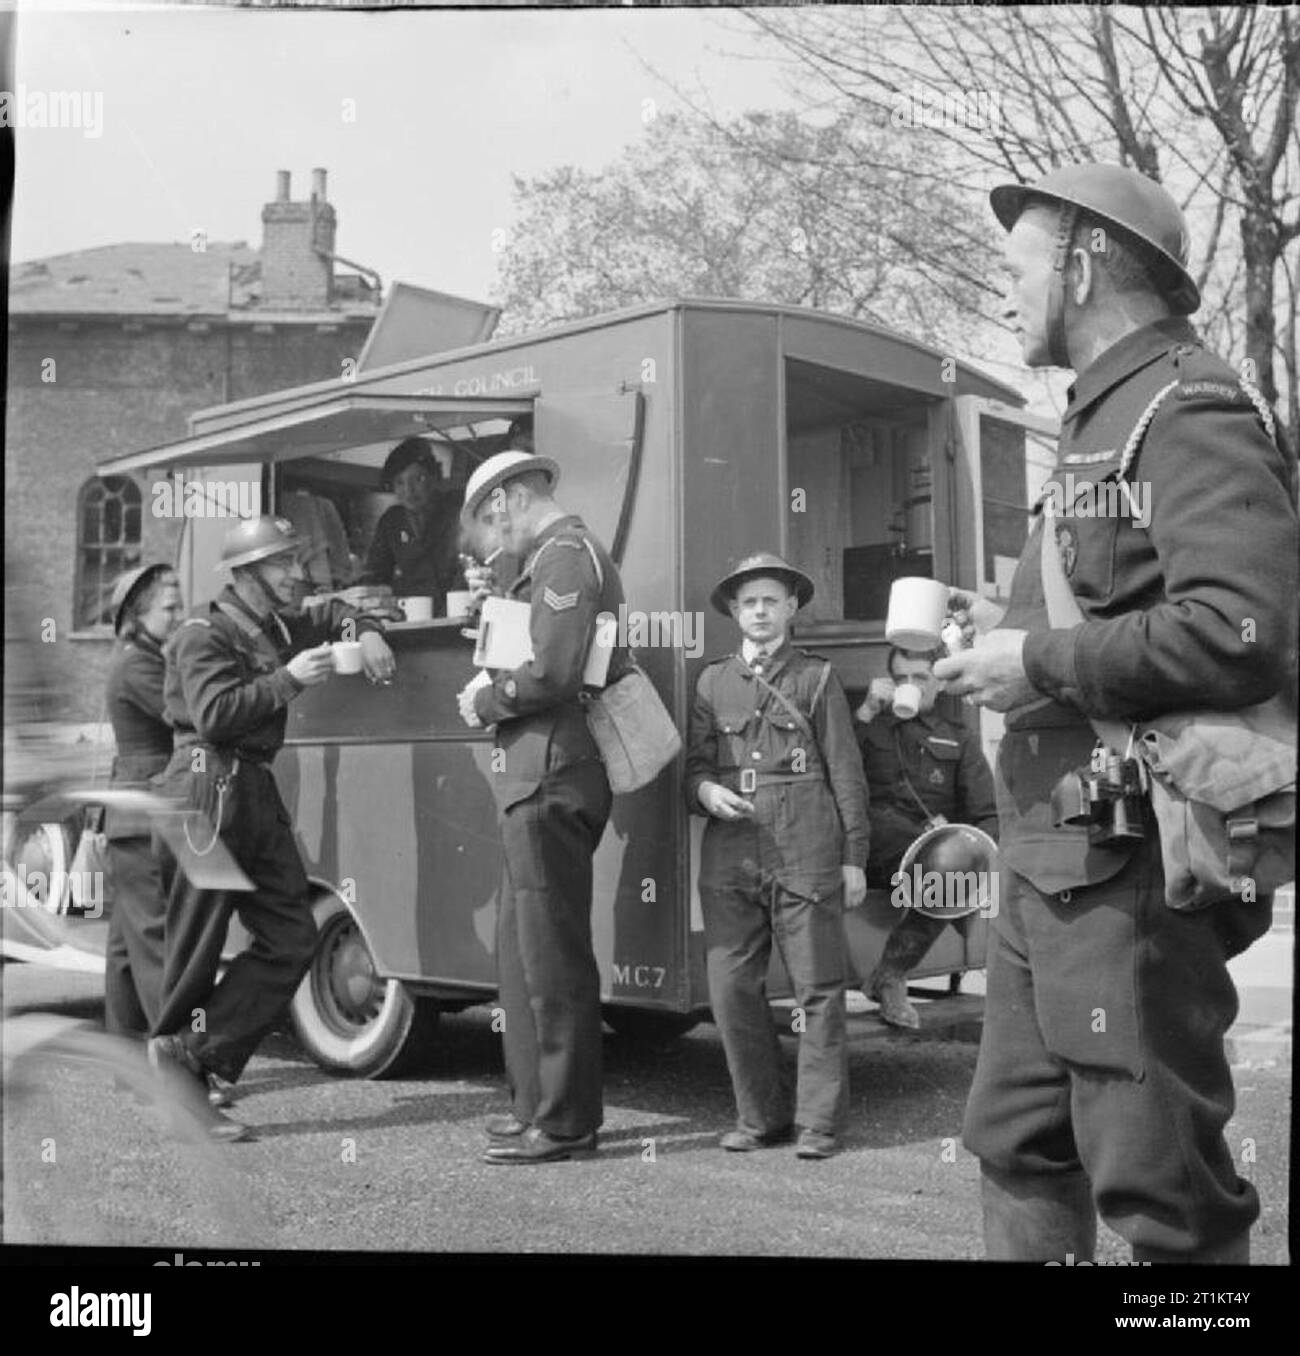 The Reconstruction of 'an Incident'- Civil Defence Training in Fulham, London, 1942 Civil Defence workers enjoy tea and refreshments at the mobile canteen during a break, now that the incident has been brought under control. As well as Civil Defence Wardens, also visible are a boy messenger and the Incident Officer, wearing a blue helmet, who can been seen lighting a cigarette in the centre of the photograph. A female Civil Defence Warden waits her turn at the counter. This photograph was almost certainly taken on Conan Street/West Cromwell Road (see also D 7916 and D 7917), near to where it j Stock Photo